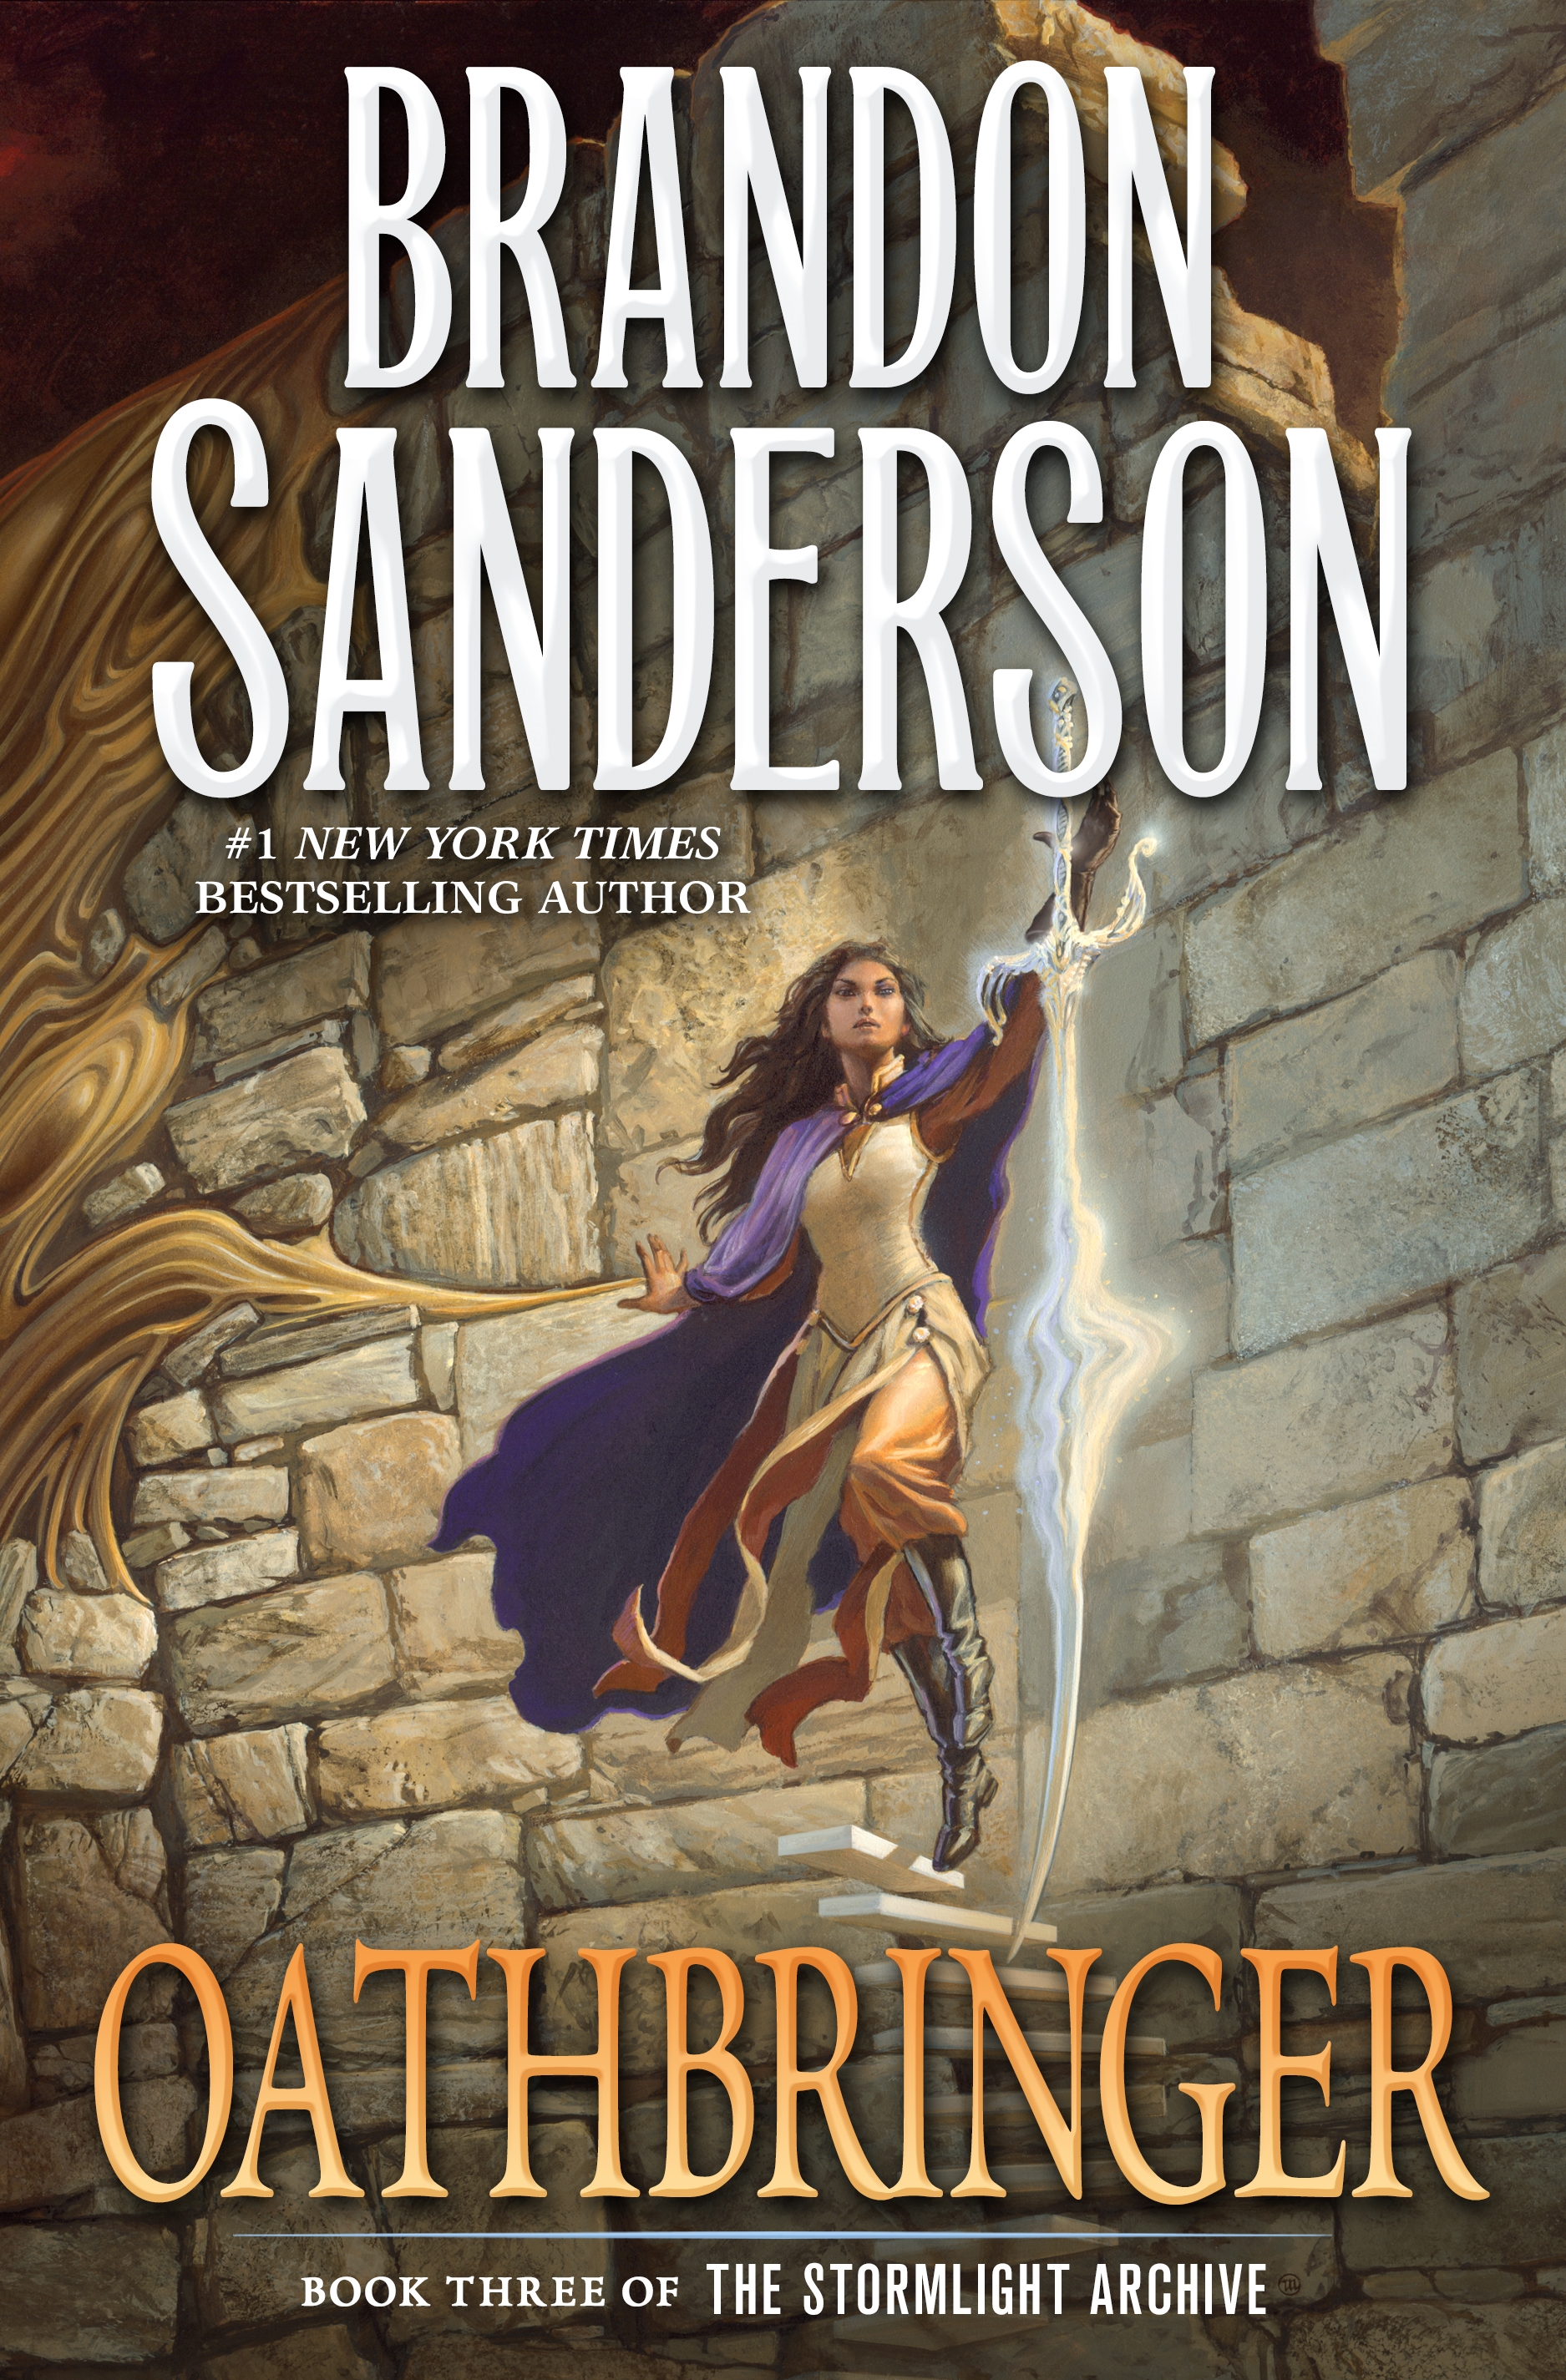 Oathbringer : Book Three of the Stormlight Archive by Brandon Sanderson